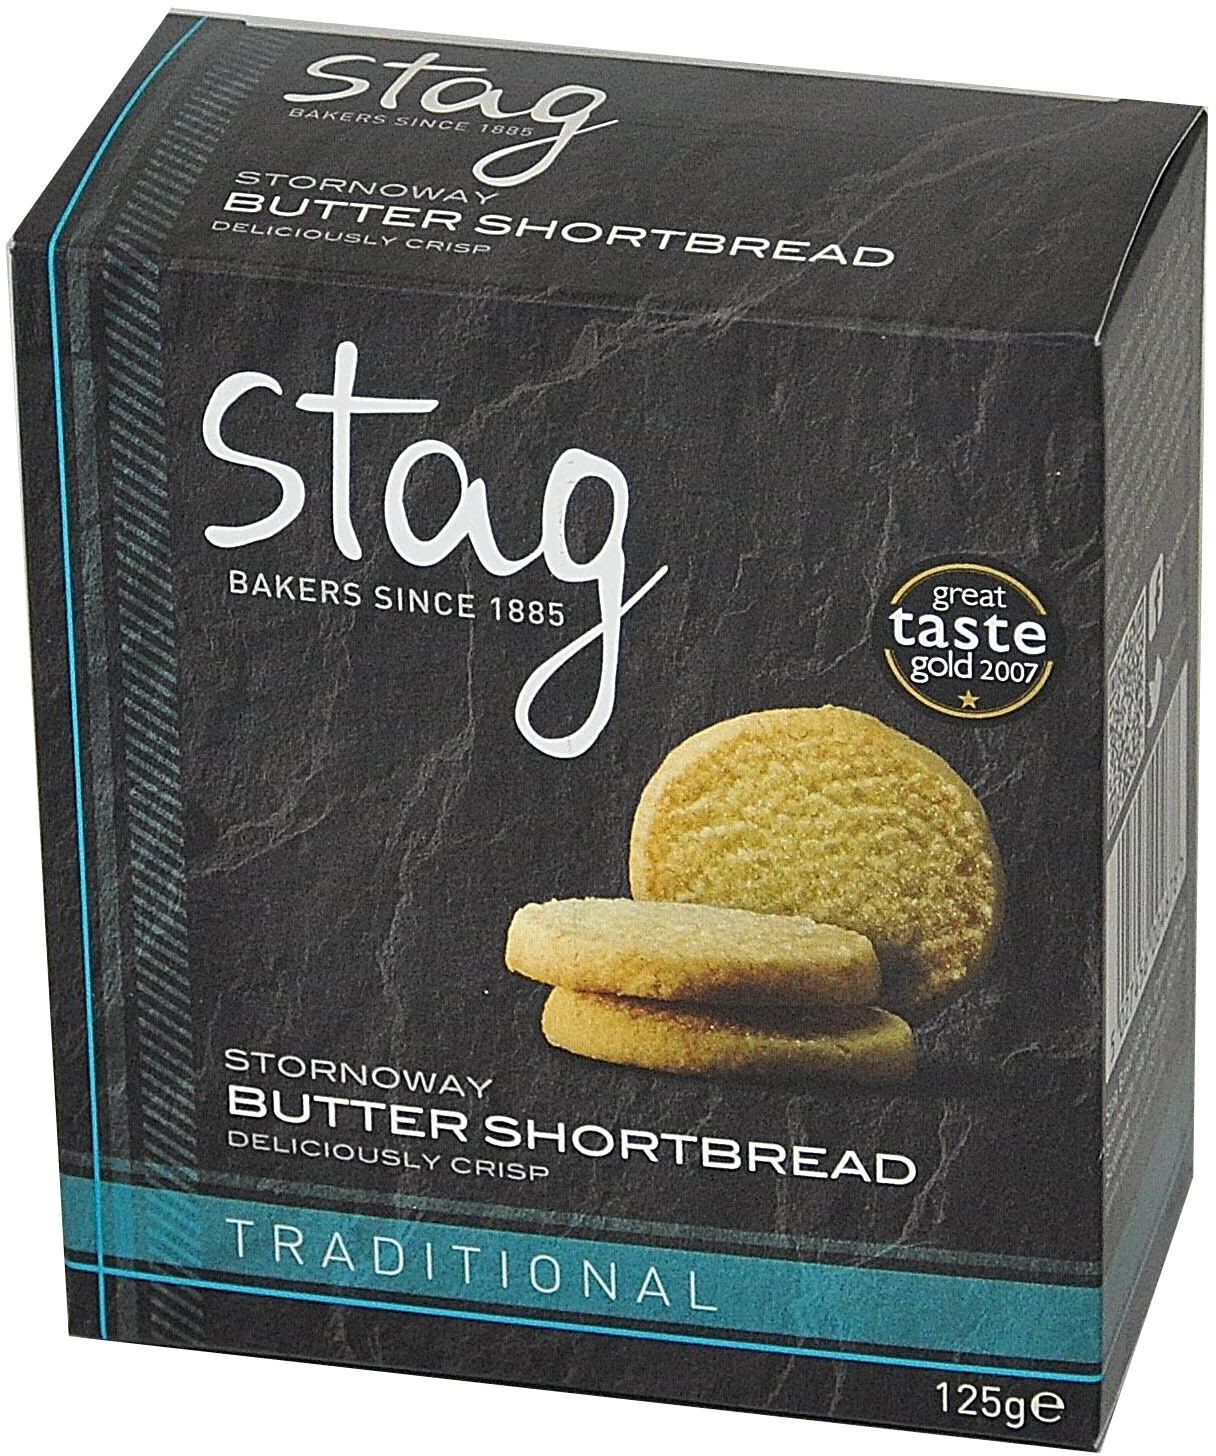 Stornoway Butter Shortbread - Boxed (125g)